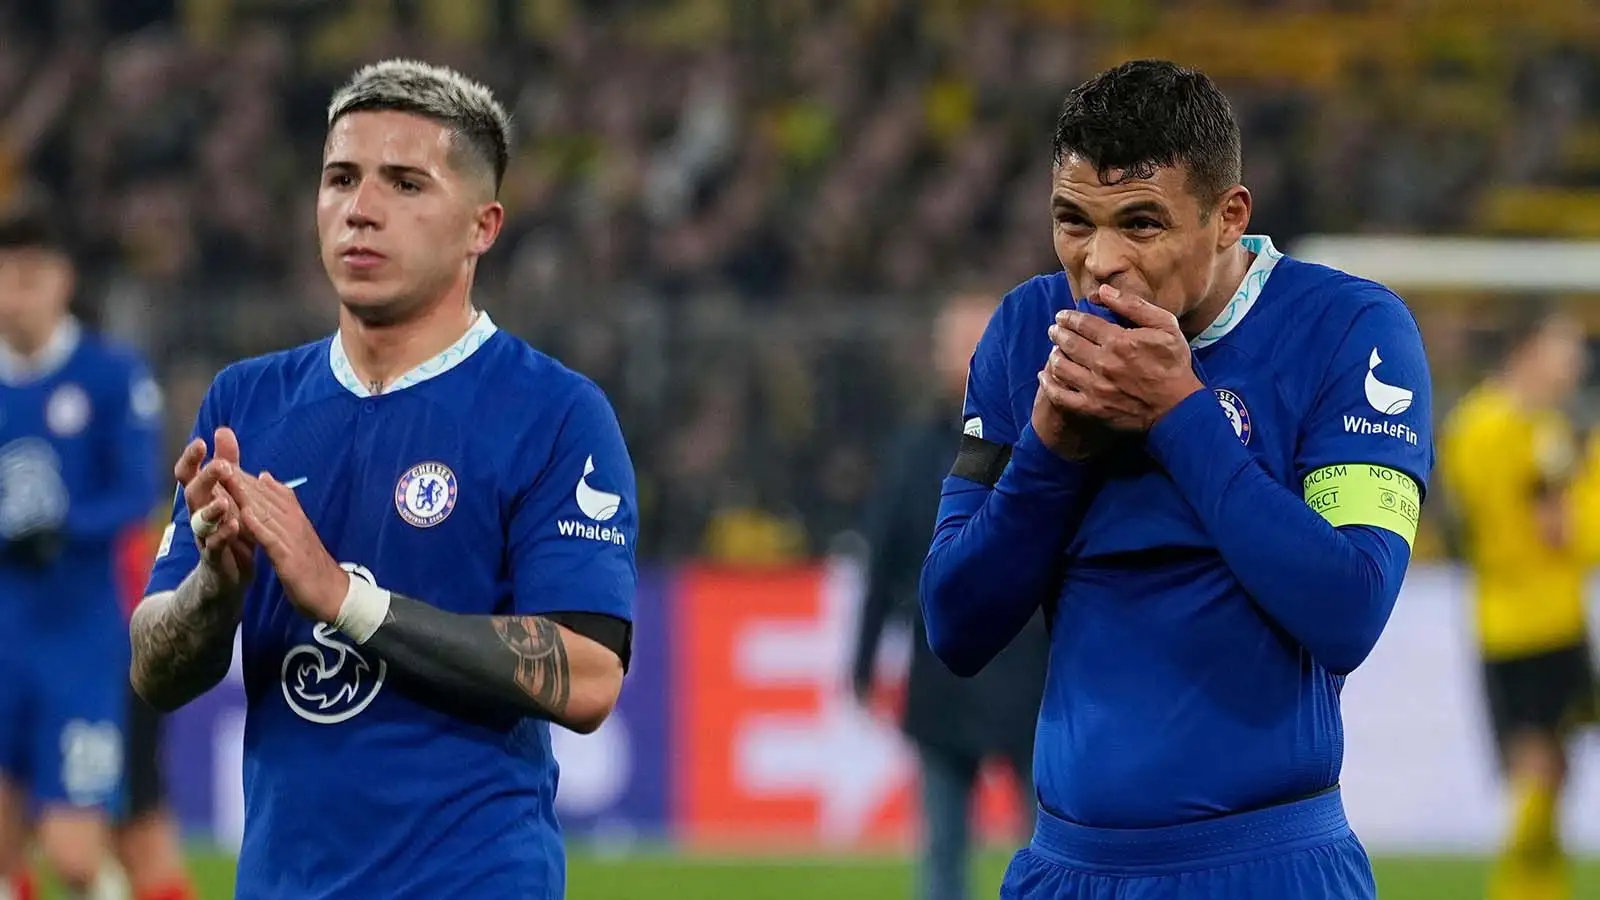 Chelsea's Enzo Fernandez, left, is flanked by his teammate Thiago Silva as they cheer supporters at the end of the Champions League, round of 16, first leg soccer match between Borussia Dortmund and Chelsea FC in Dortmund, Germany, Wednesday, Feb. 15, 2023